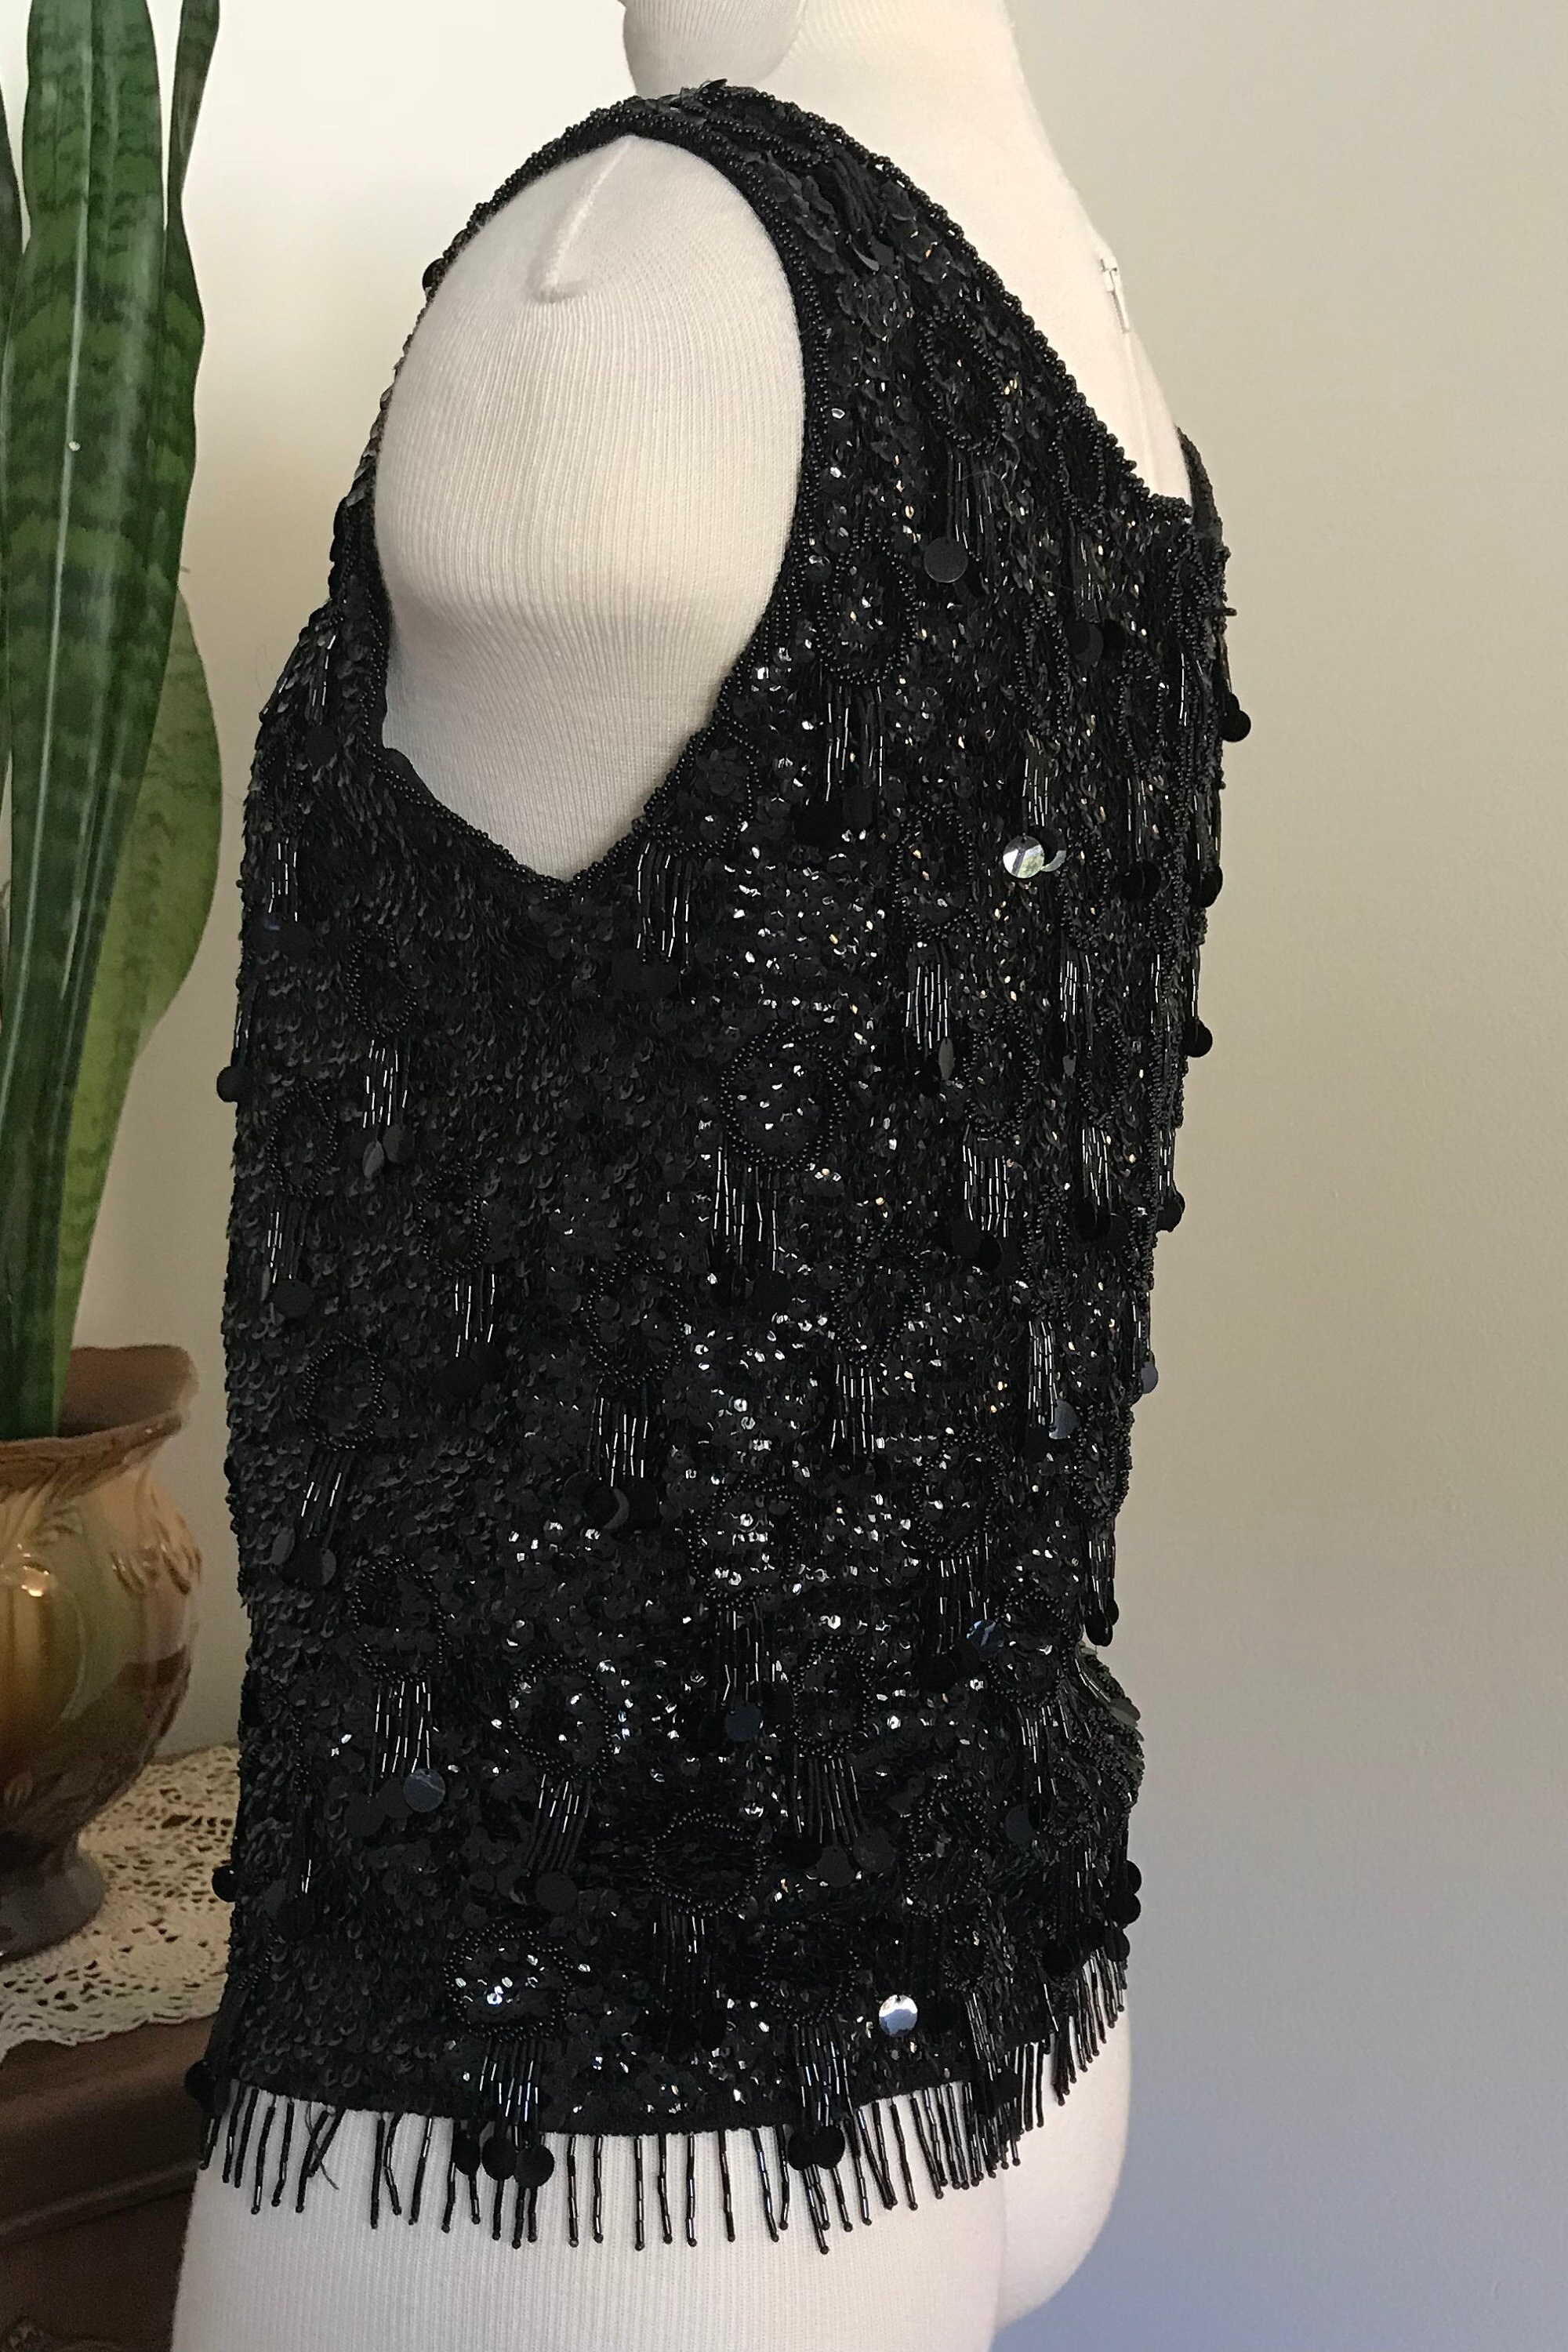 Vintage Black Beaded Tank Top Made in British Crown Colony of - Etsy